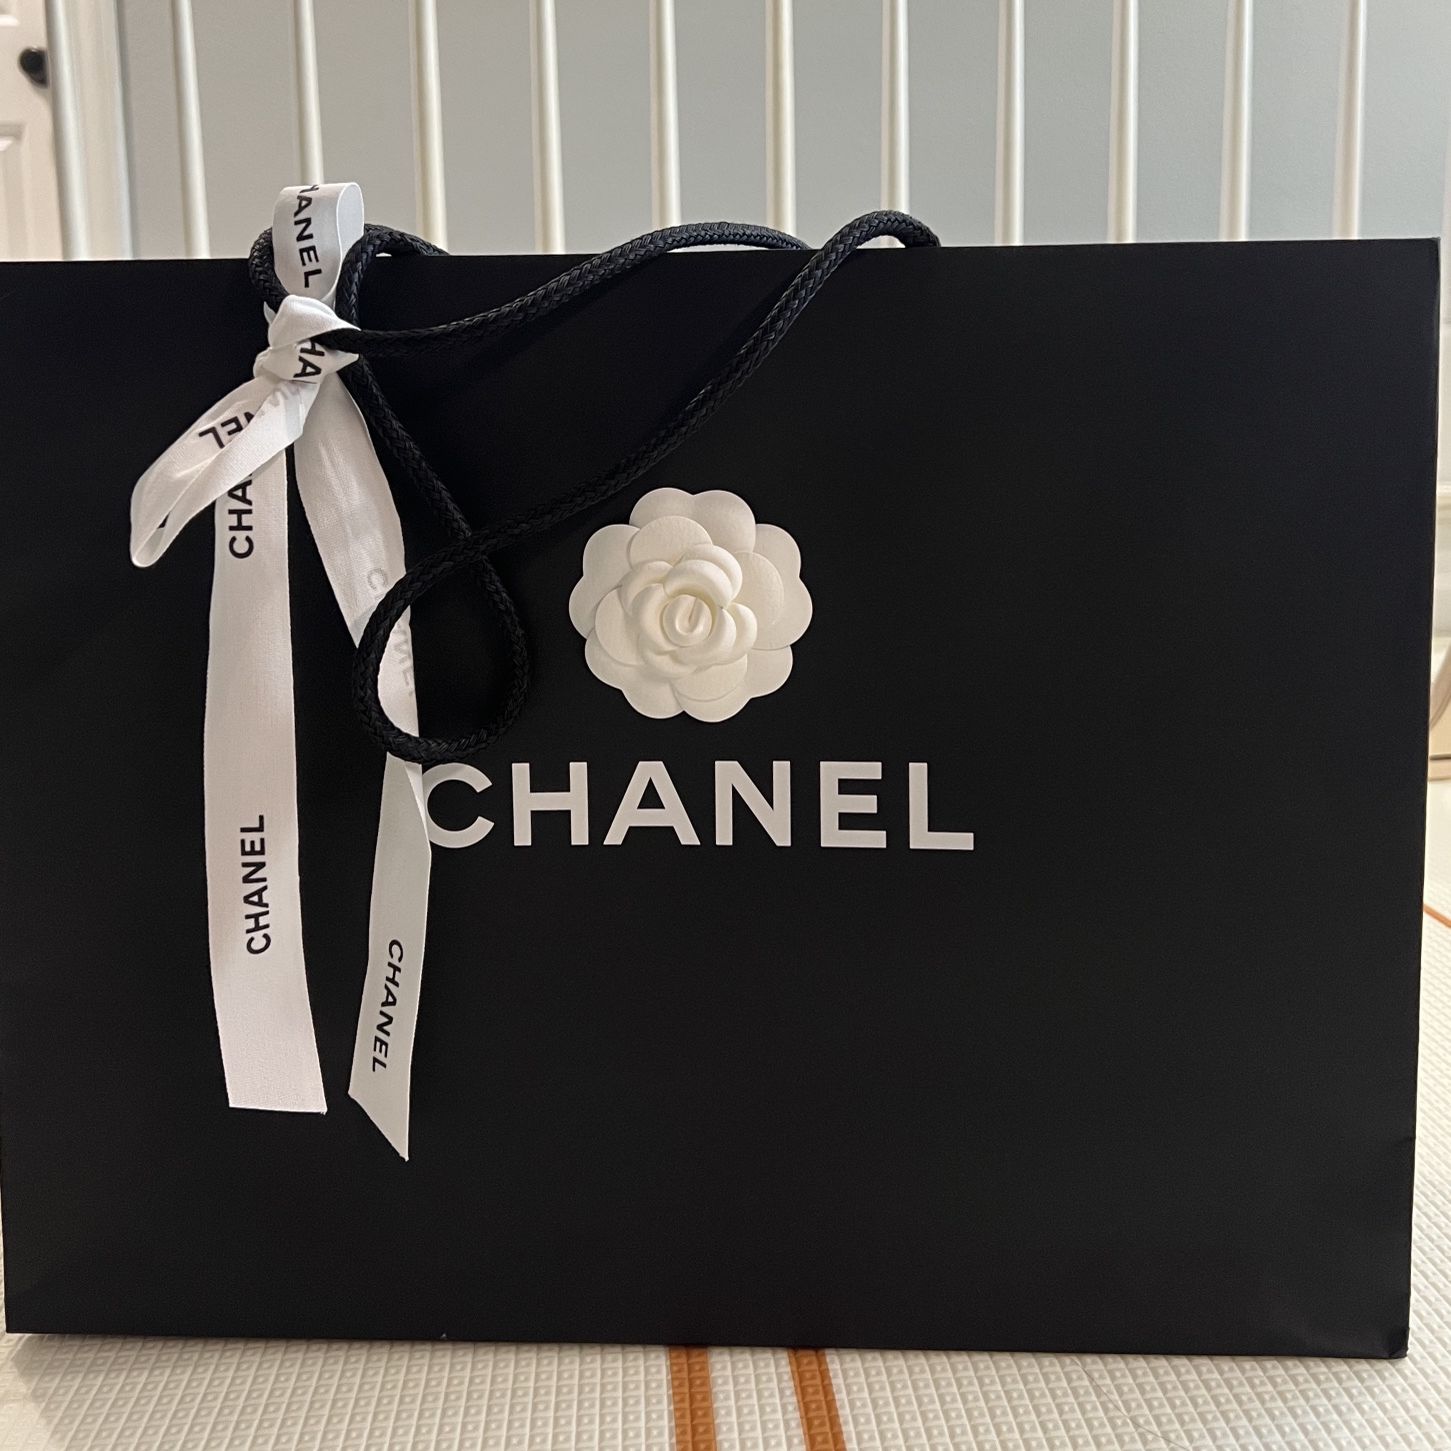 Chanel Shopping Bag With Ribbon and Camellia for Sale in Houston